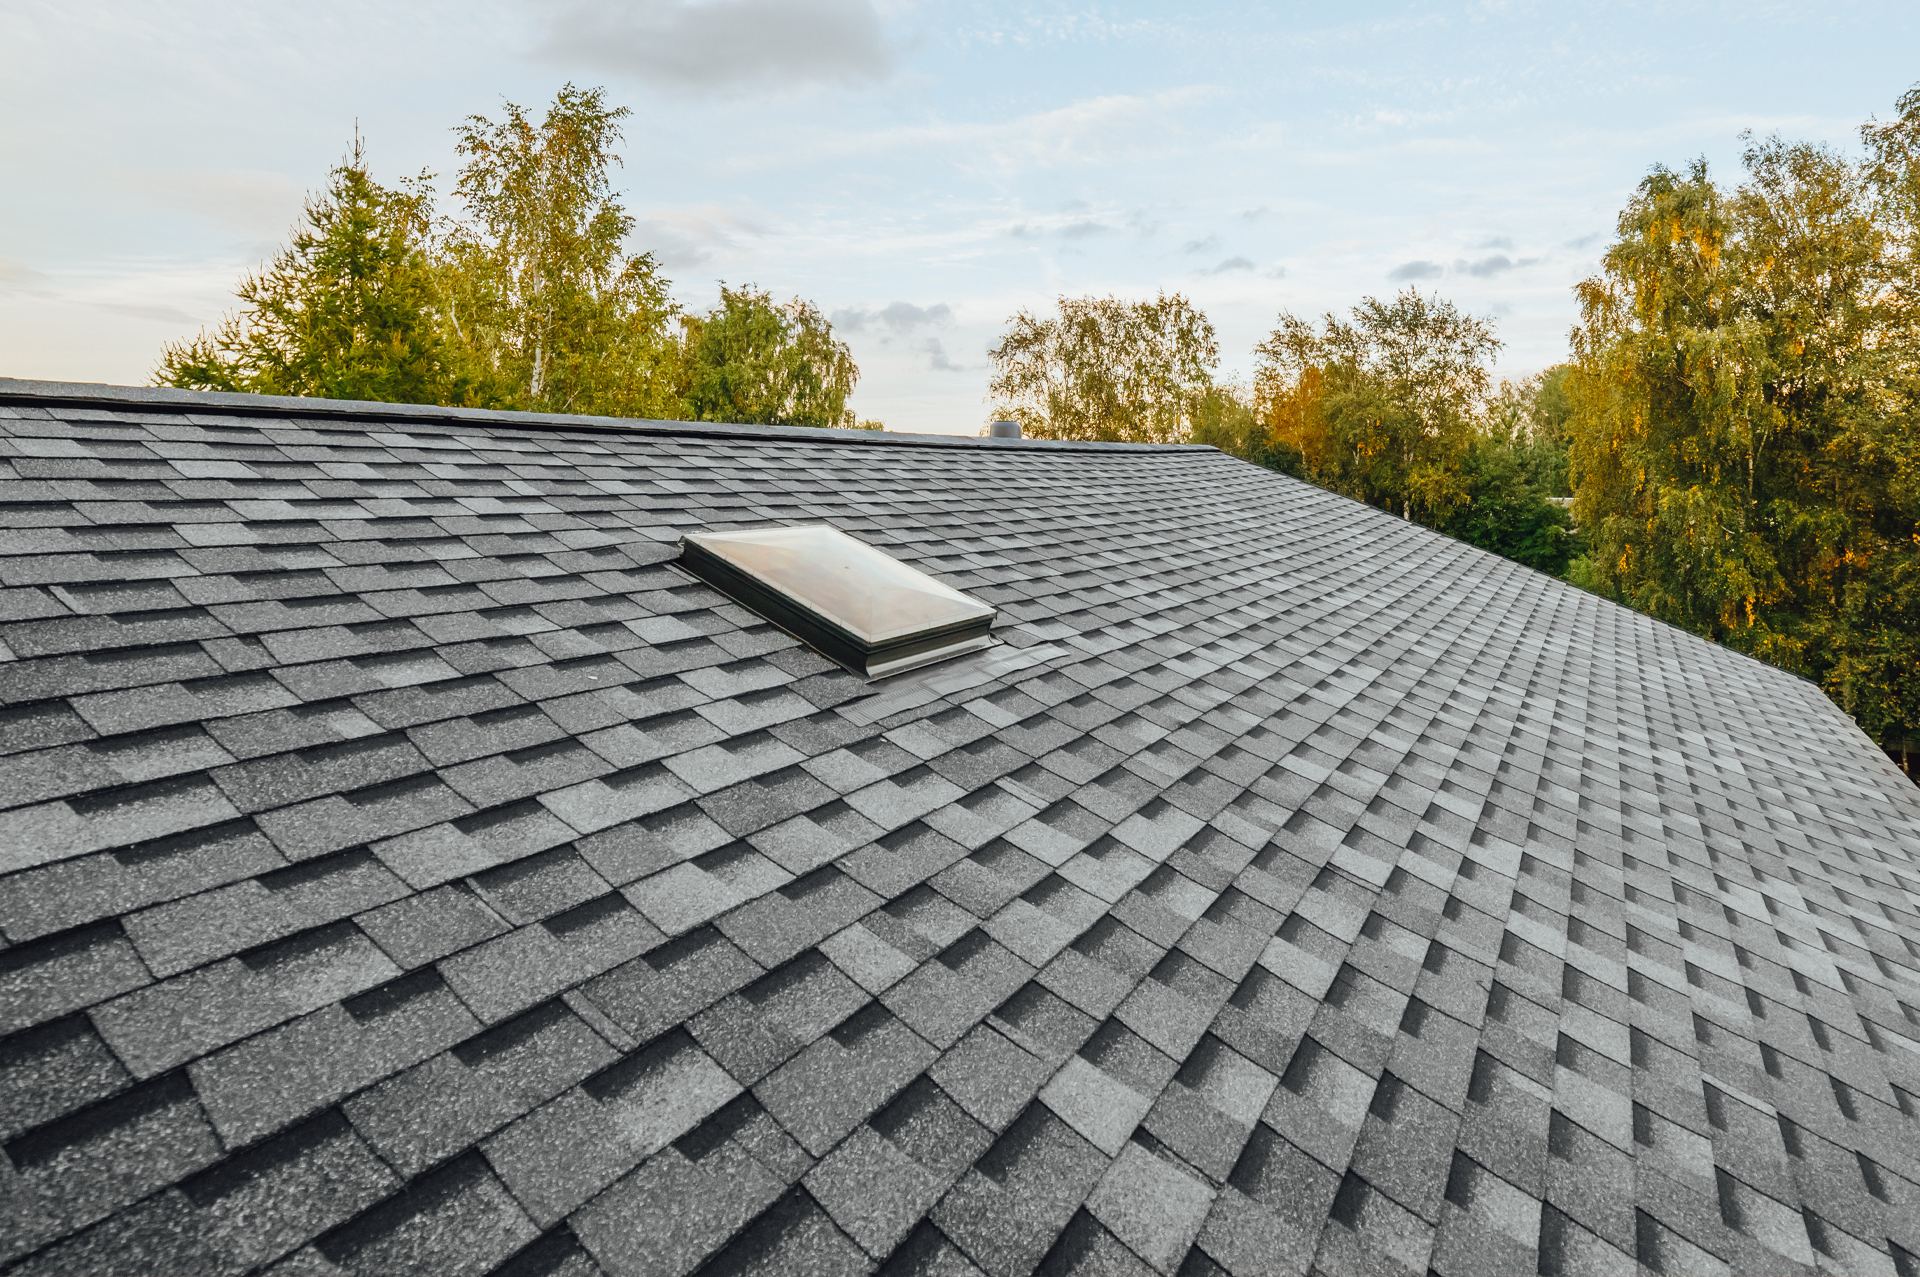 September Offer: FREE Owens Corning Platinum Protection Warranty from Dick’s Roof Repair Service